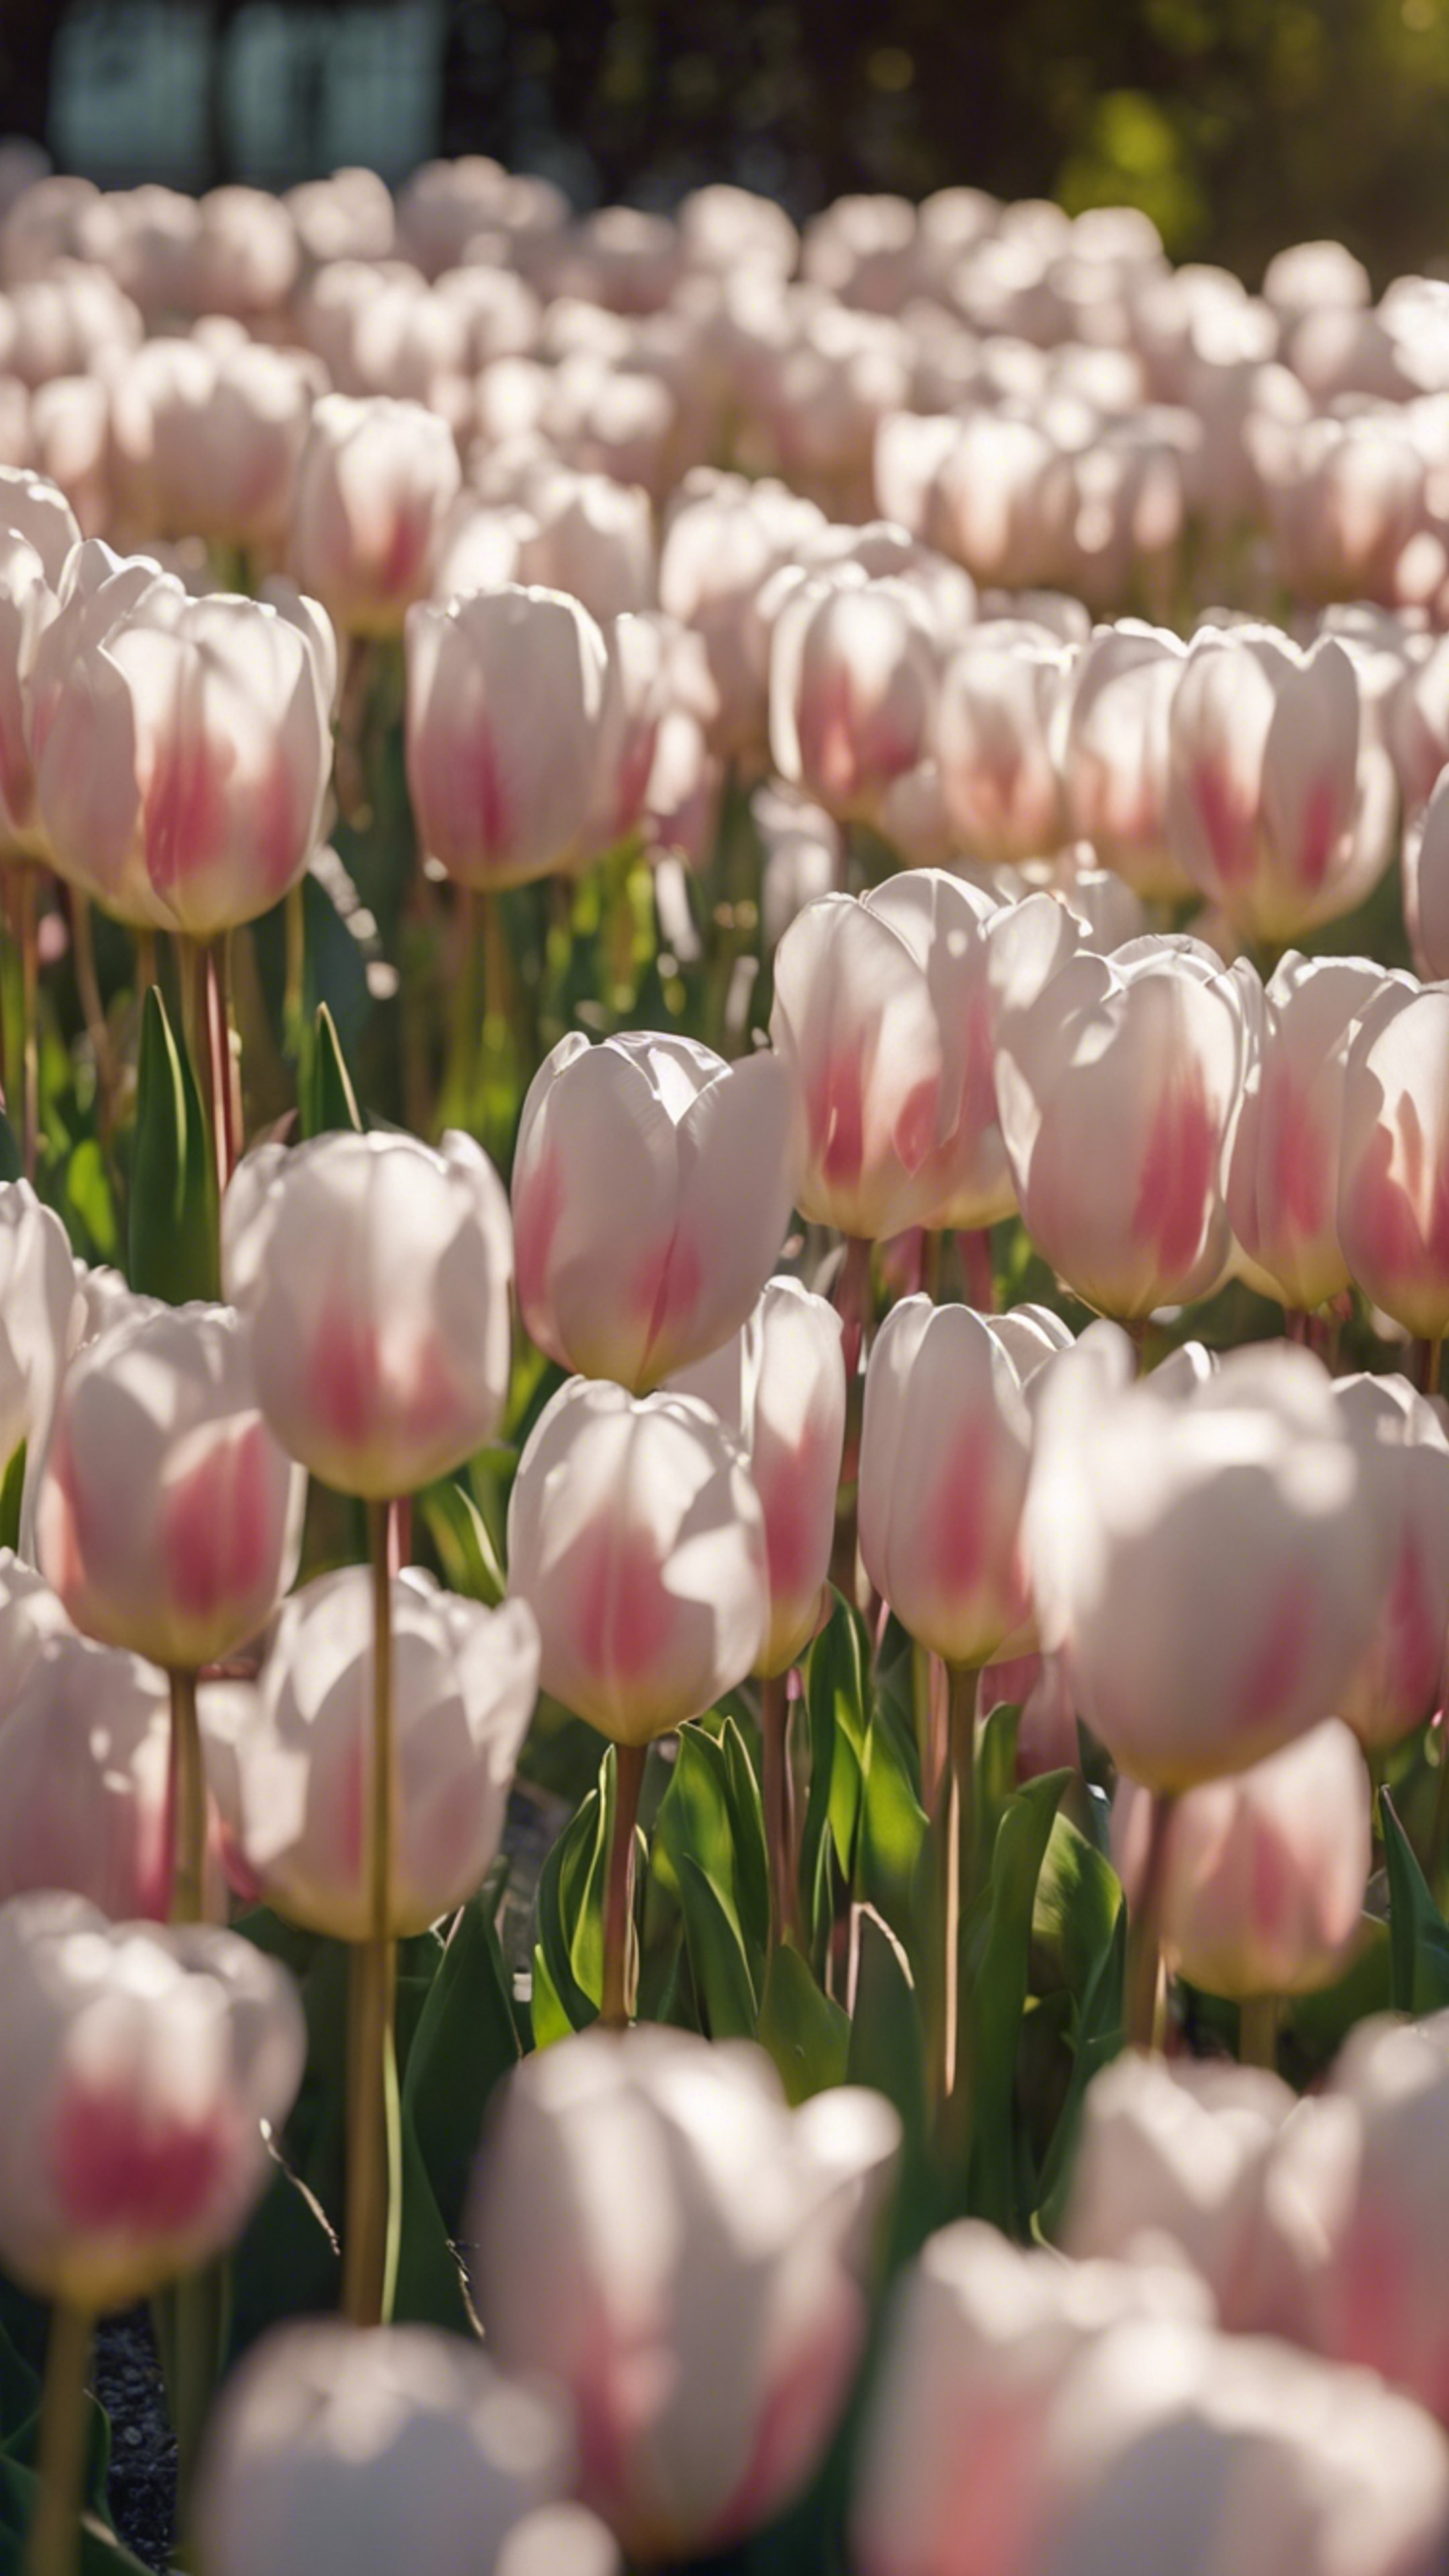 A garden filled with white and pink tulips, shimmering under the soft glow of a morning sun. Tapeet[0043435f230e41f4a509]